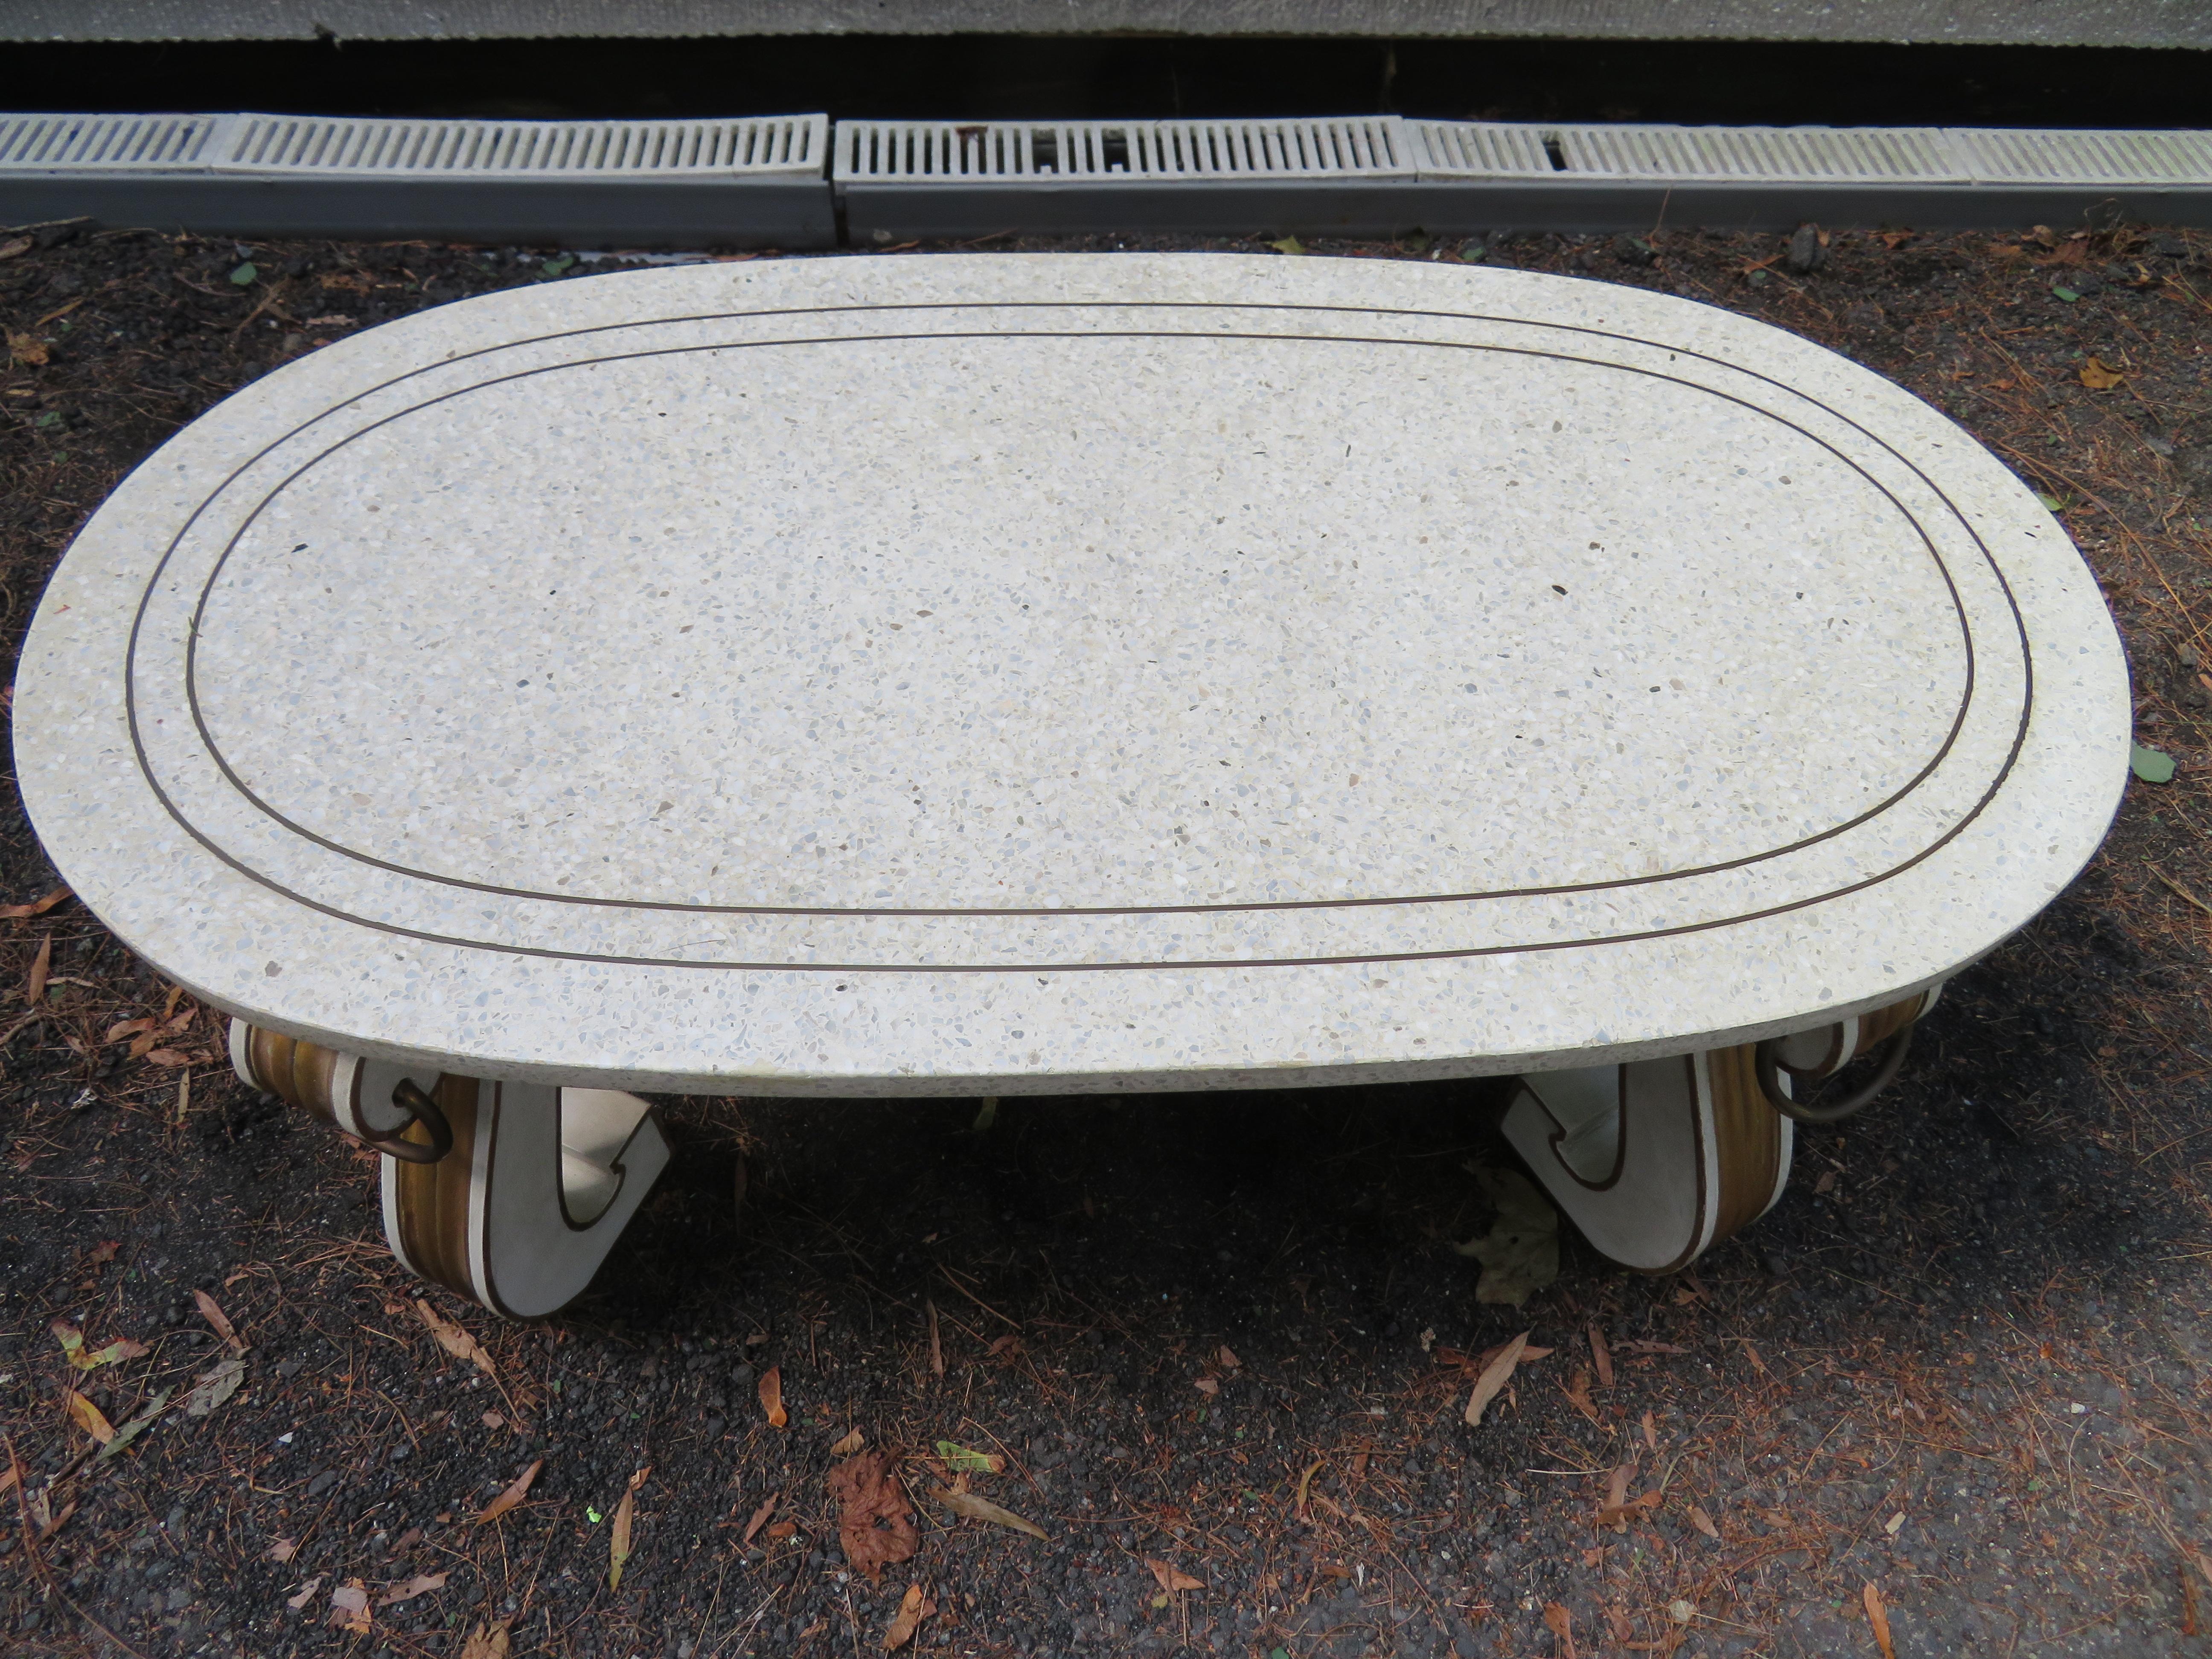 Spectacular Dorothy Draper Espana collection terrazzo top coffee table. Just look at the wonderful removable racetrack terrazza top against the gilded gold detailed scrolled legs-stunning. We also love the brass ring detail on all the corners-so